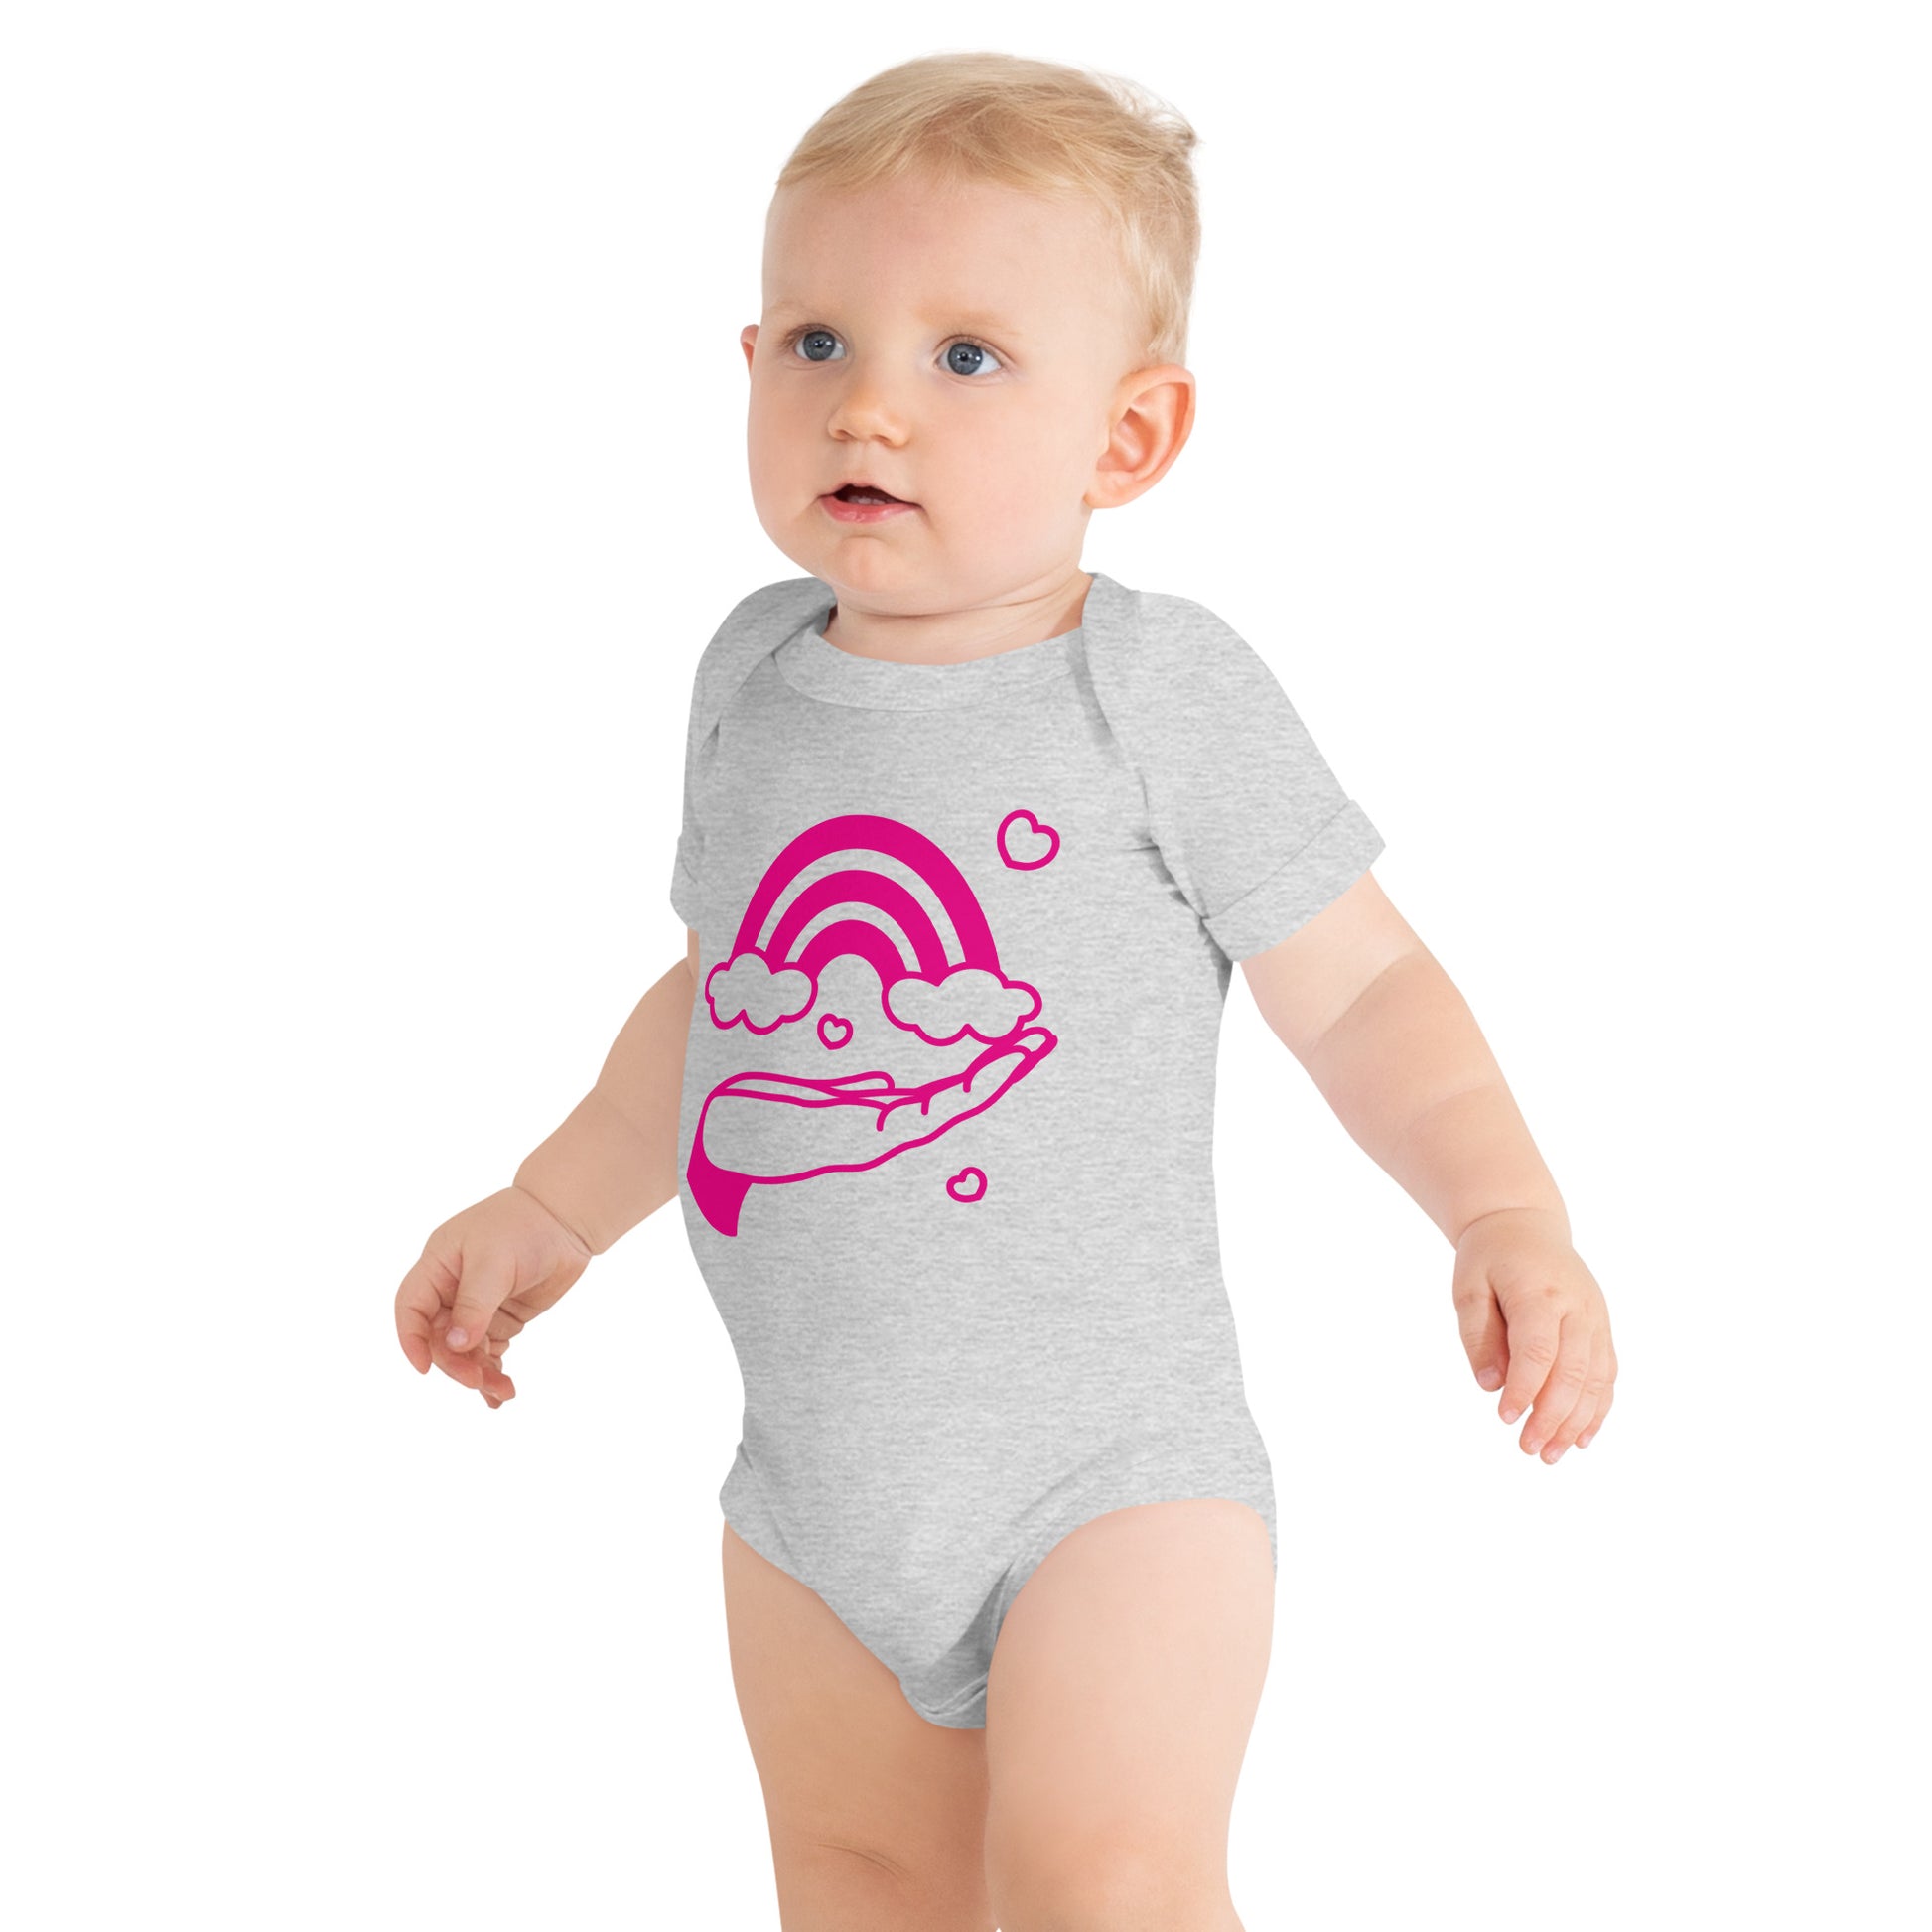 baby with grey short sleeve one piece with print of pink hand holding a pink rainbow